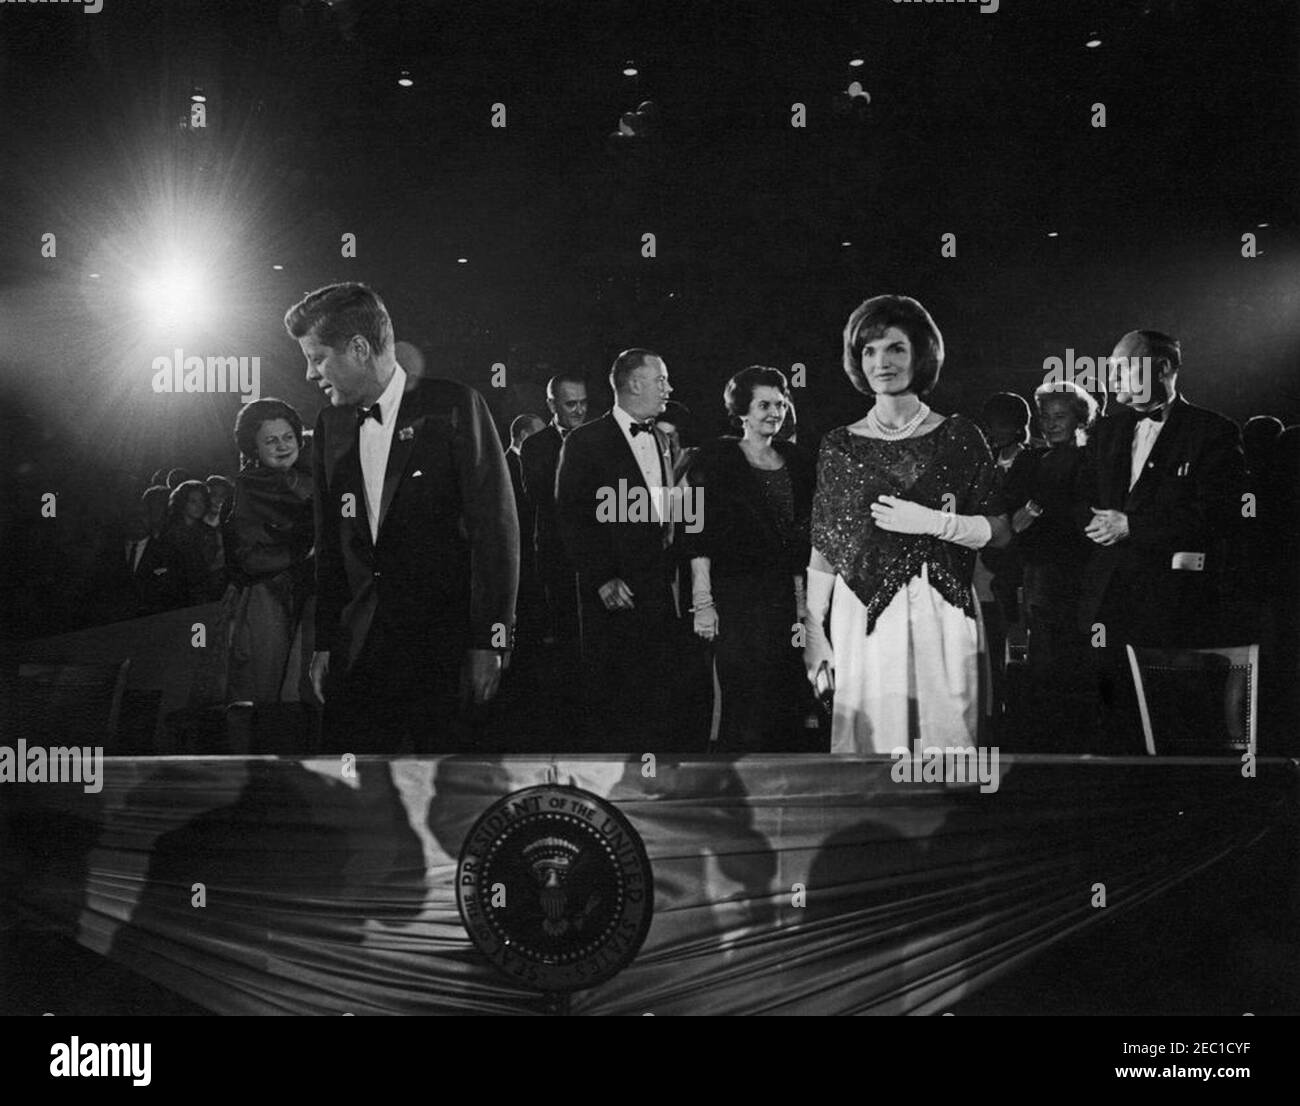 Second Inaugural Salute to the President Dinner, 7:30PM. President John F. Kennedy (left) and First Lady Jacqueline Kennedy (right) attend the Second Inaugural Salute to the President, commemorating the second anniversary of President Kennedyu0027s inauguration. Bedford S. Wynne, chairman of the event (in profile), stands right of the President; Vice President Lyndon B. Johnson and Lady Bird Johnson (mostly hidden) are behind Mr. Wynne. Standing right of the First Lady are Chairman of the Democratic National Committee (DNC) John M. Bailey; Maureen Hayes Mansfield, wife of Senator Mike Mansfie Stock Photo